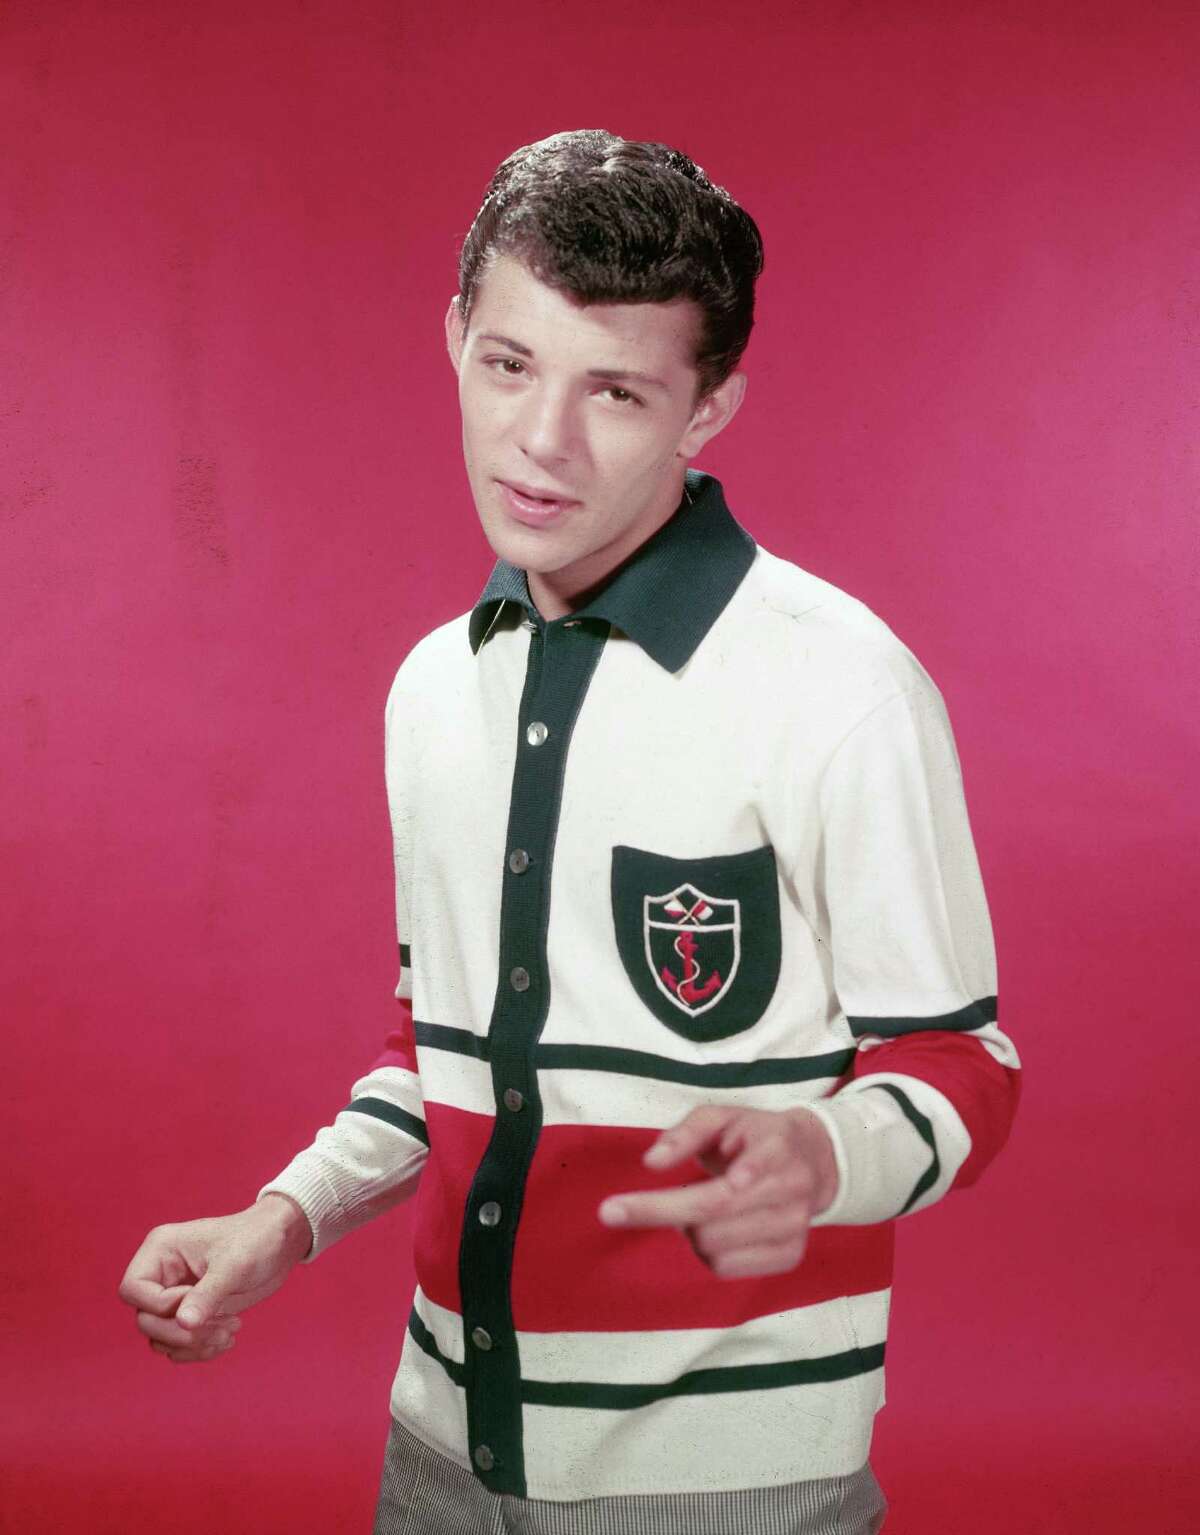 Then: American singer and actor Frankie Avalon wearing a red, white, and blue cardigan sweater in 1955.